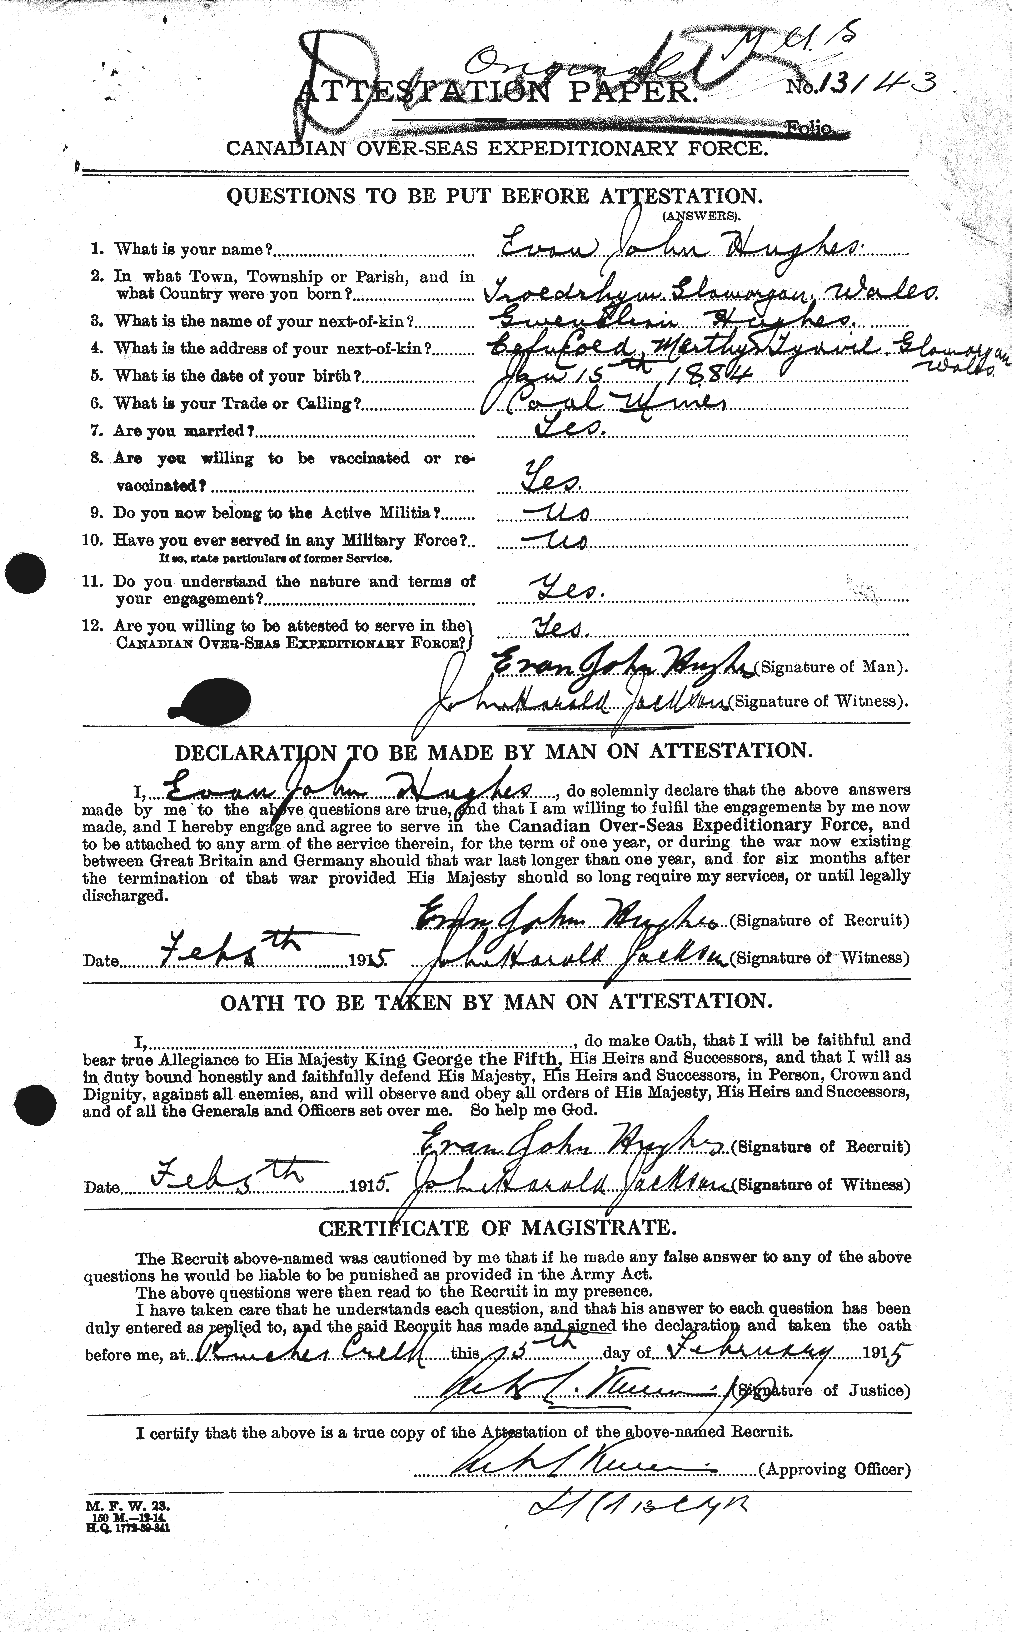 Personnel Records of the First World War - CEF 403760a